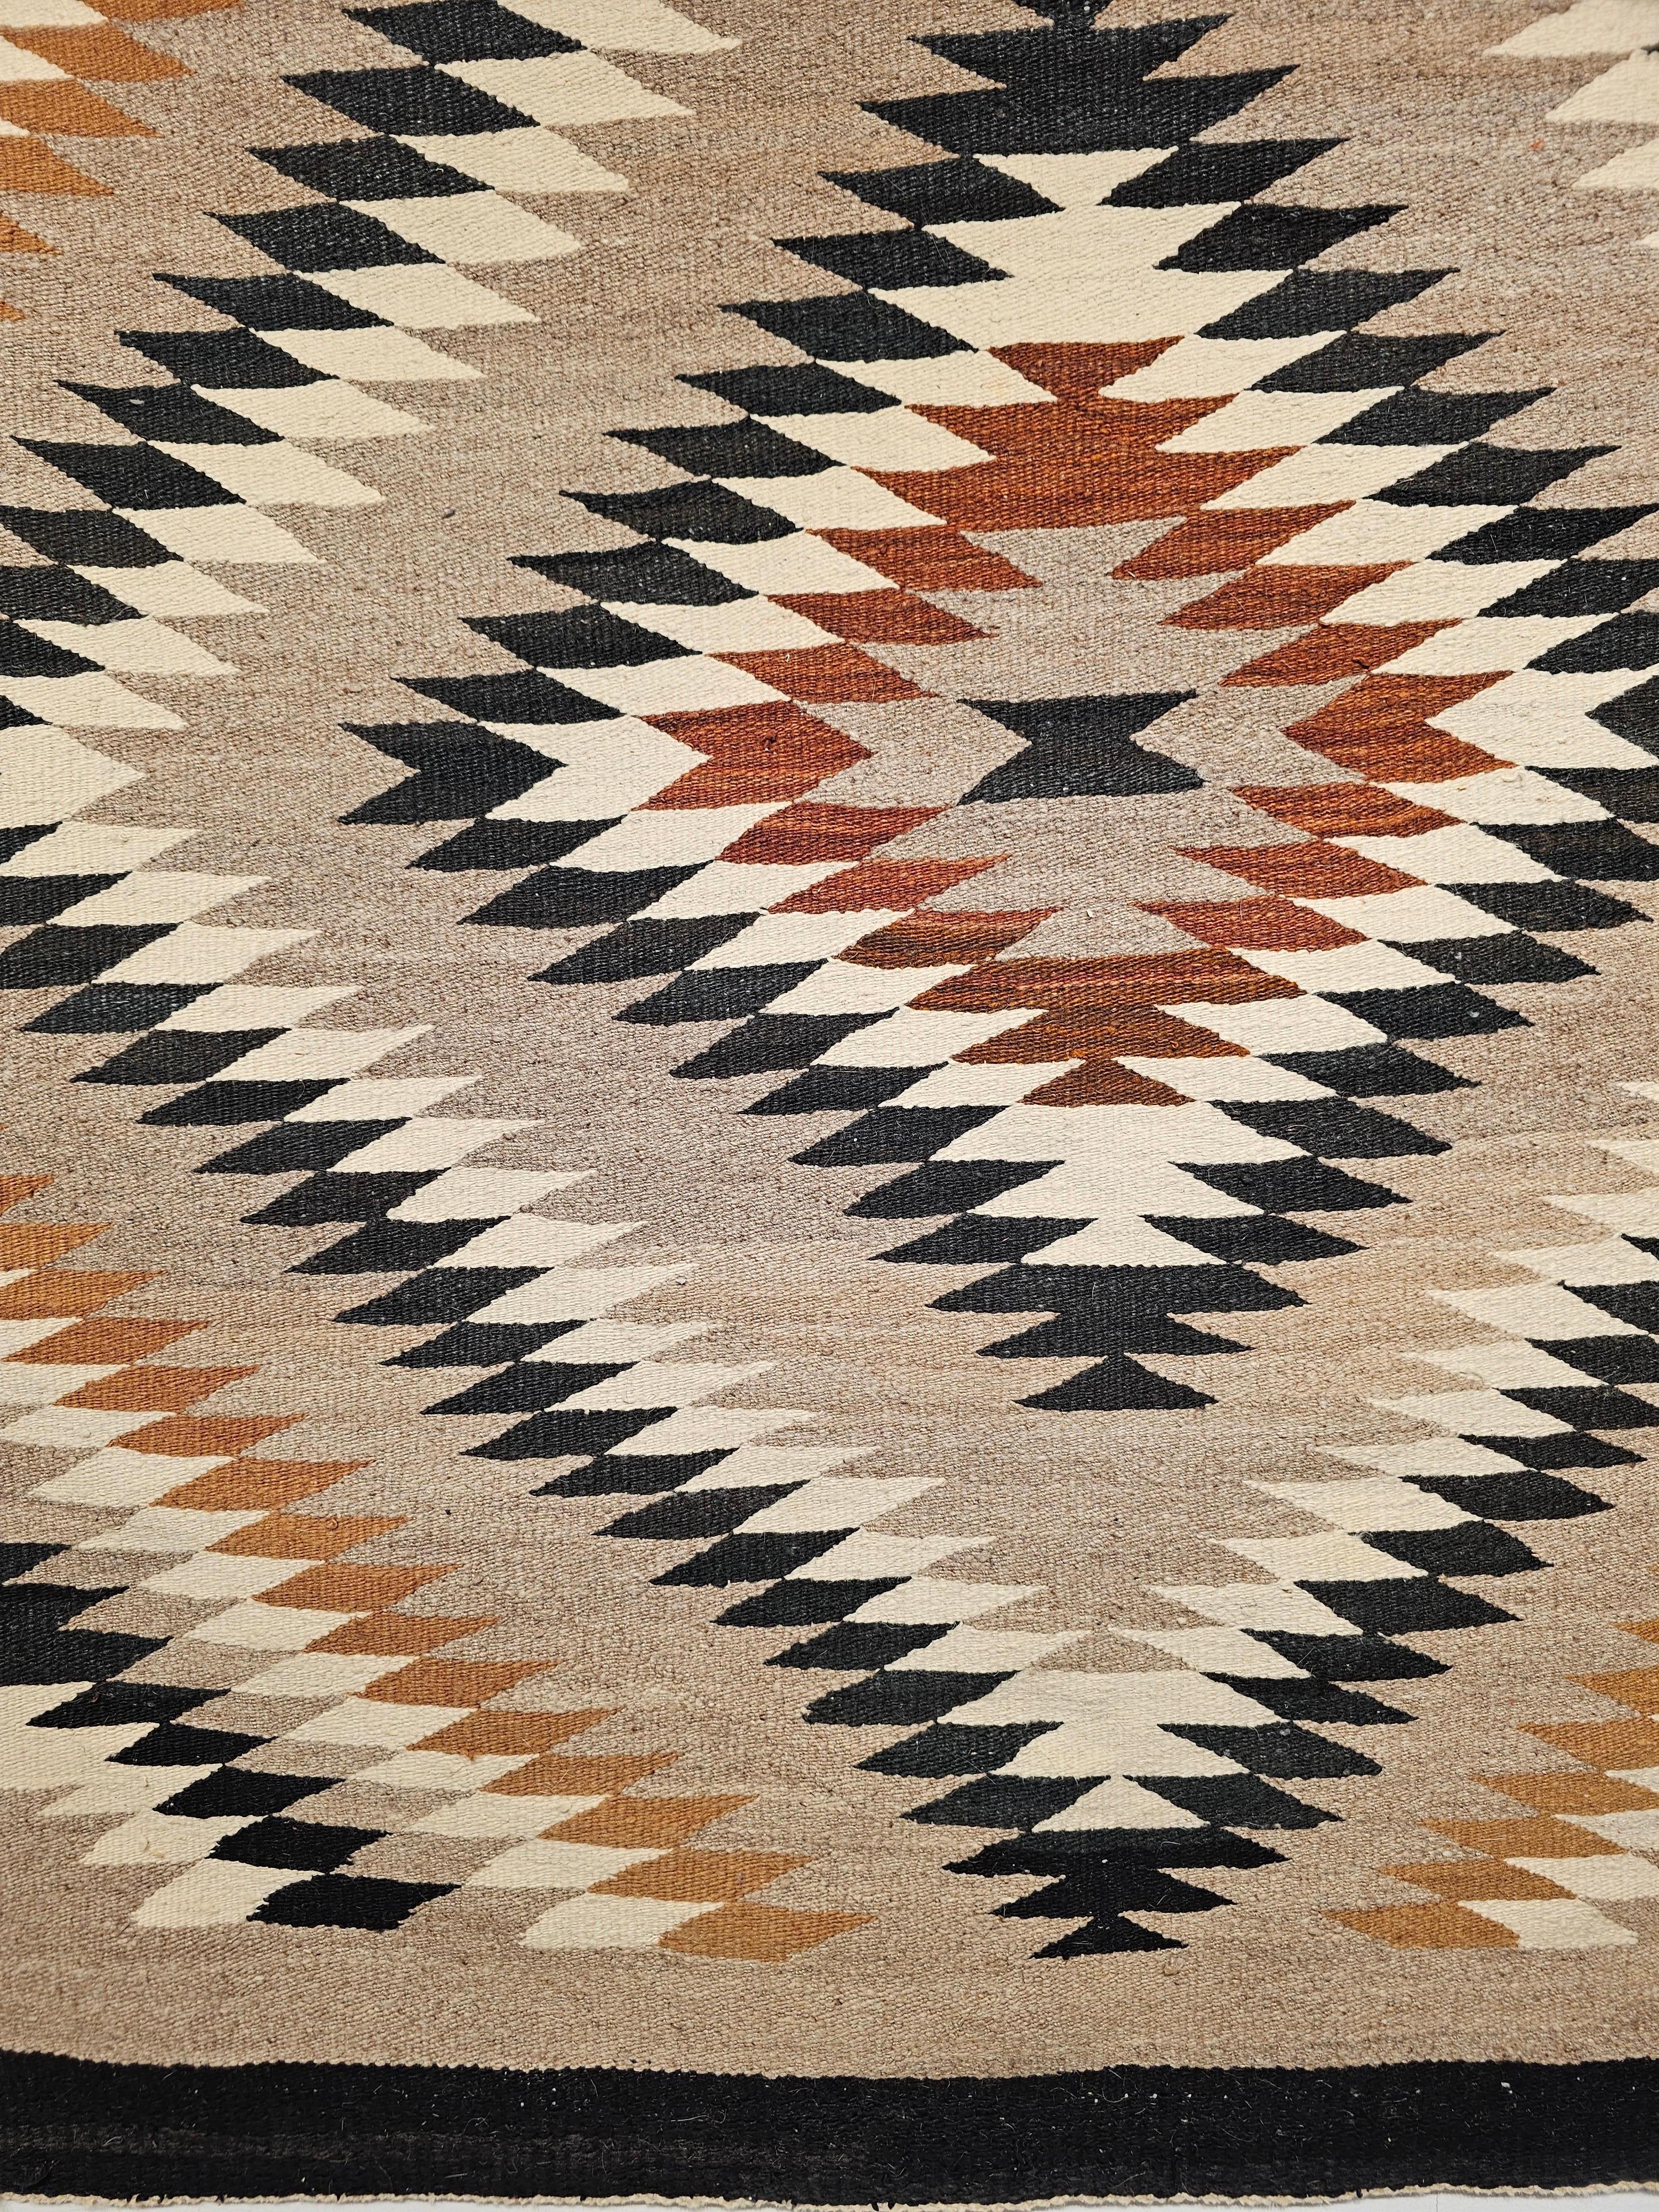 Vegetable Dyed Vintage Native American Navajo Rug in Eye Dazzler Pattern in Earth Tone Colors For Sale